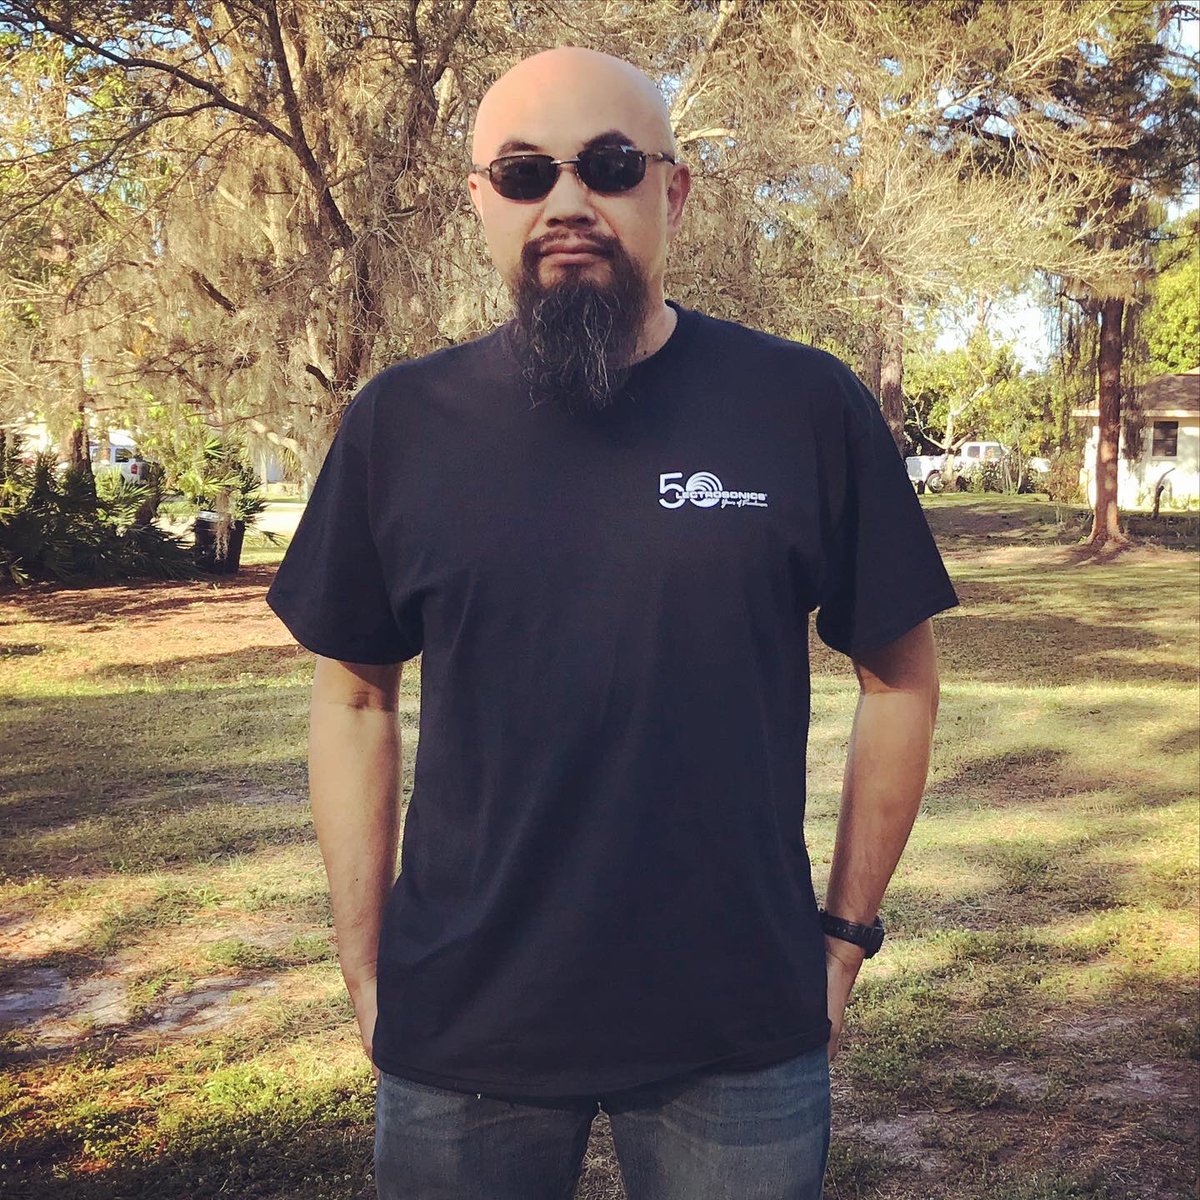 #SoundIsEssential Thanks for the cool shirt, Lectrosonics ❤️🔊👍🏻
.
Try watching a video with horrible audio. You’ll quickly find out why Sound Is Essential 😉
#soundeffects #lectrosonics #watsonwu #soundeffectsrecordist #soundeditor #sounddesigner #recordingartist #microphone